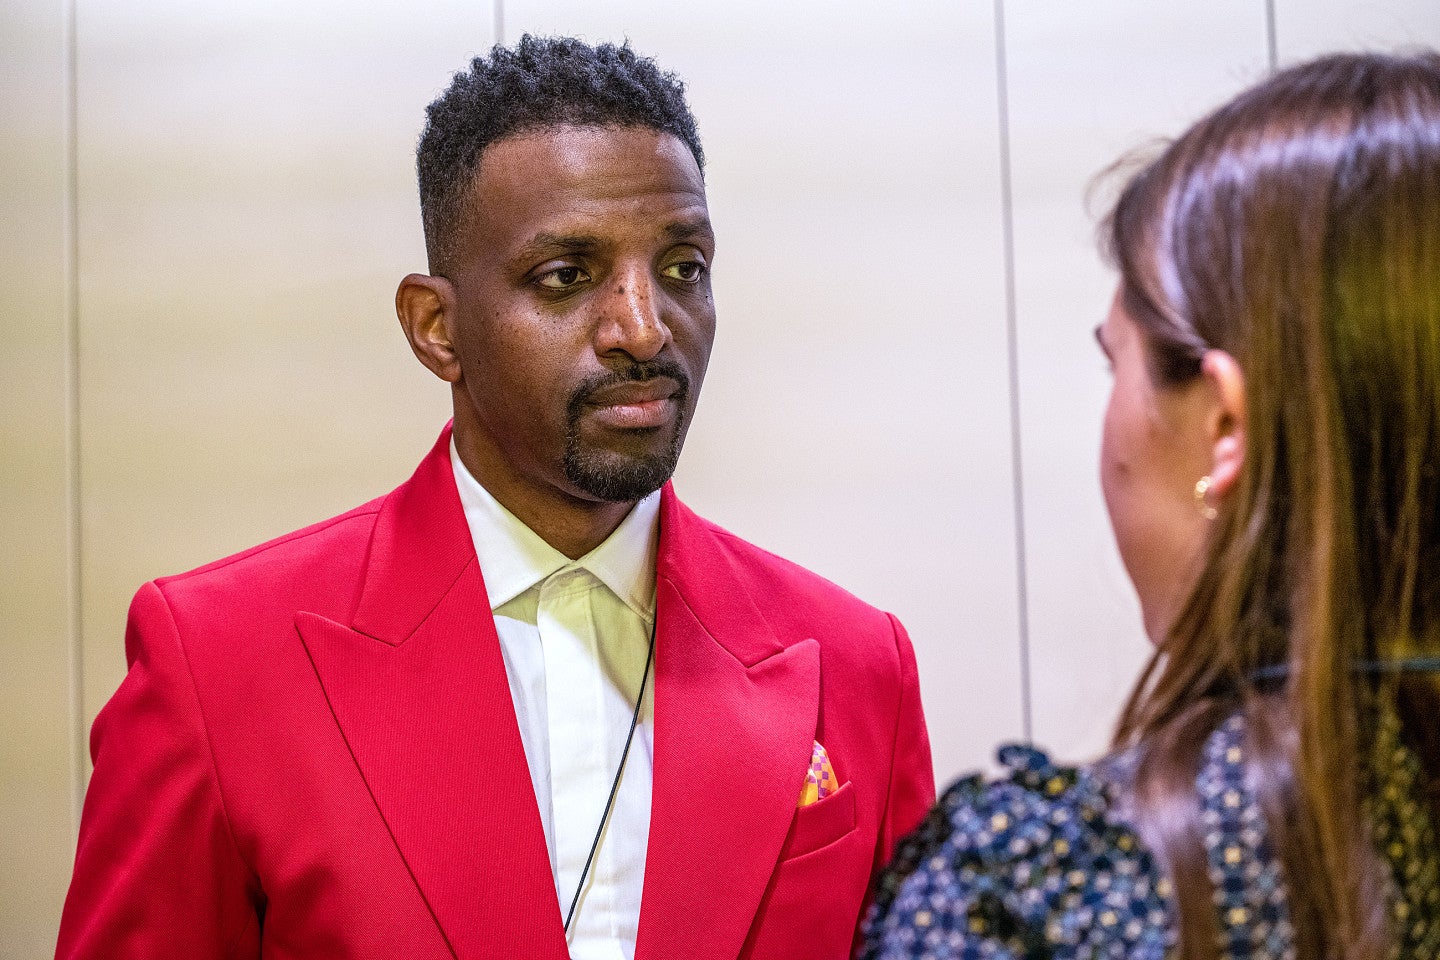 J. Ivy, wearing a bright red suit jacket, being interviewed by a student